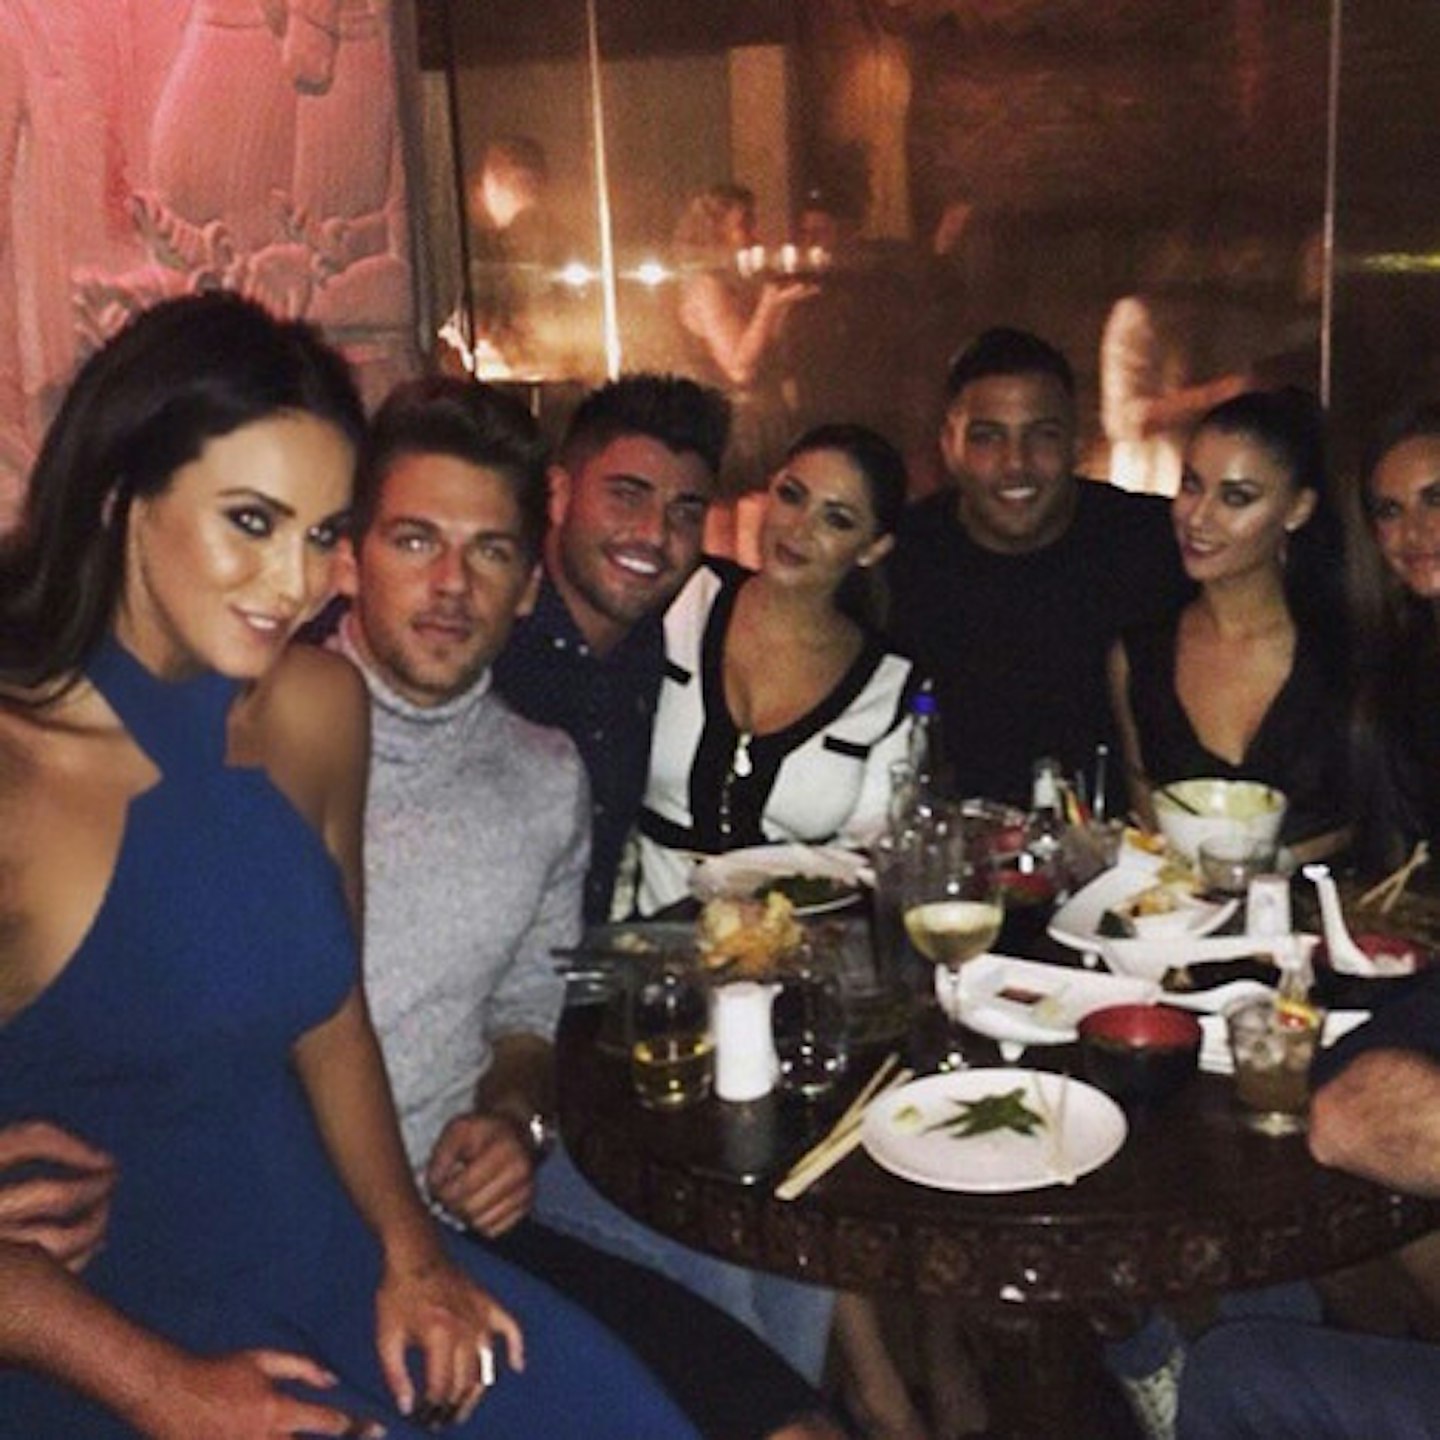 Joss and Vicky with their fellow reality TV couple Rogan O'Connor and Casey Batchelor